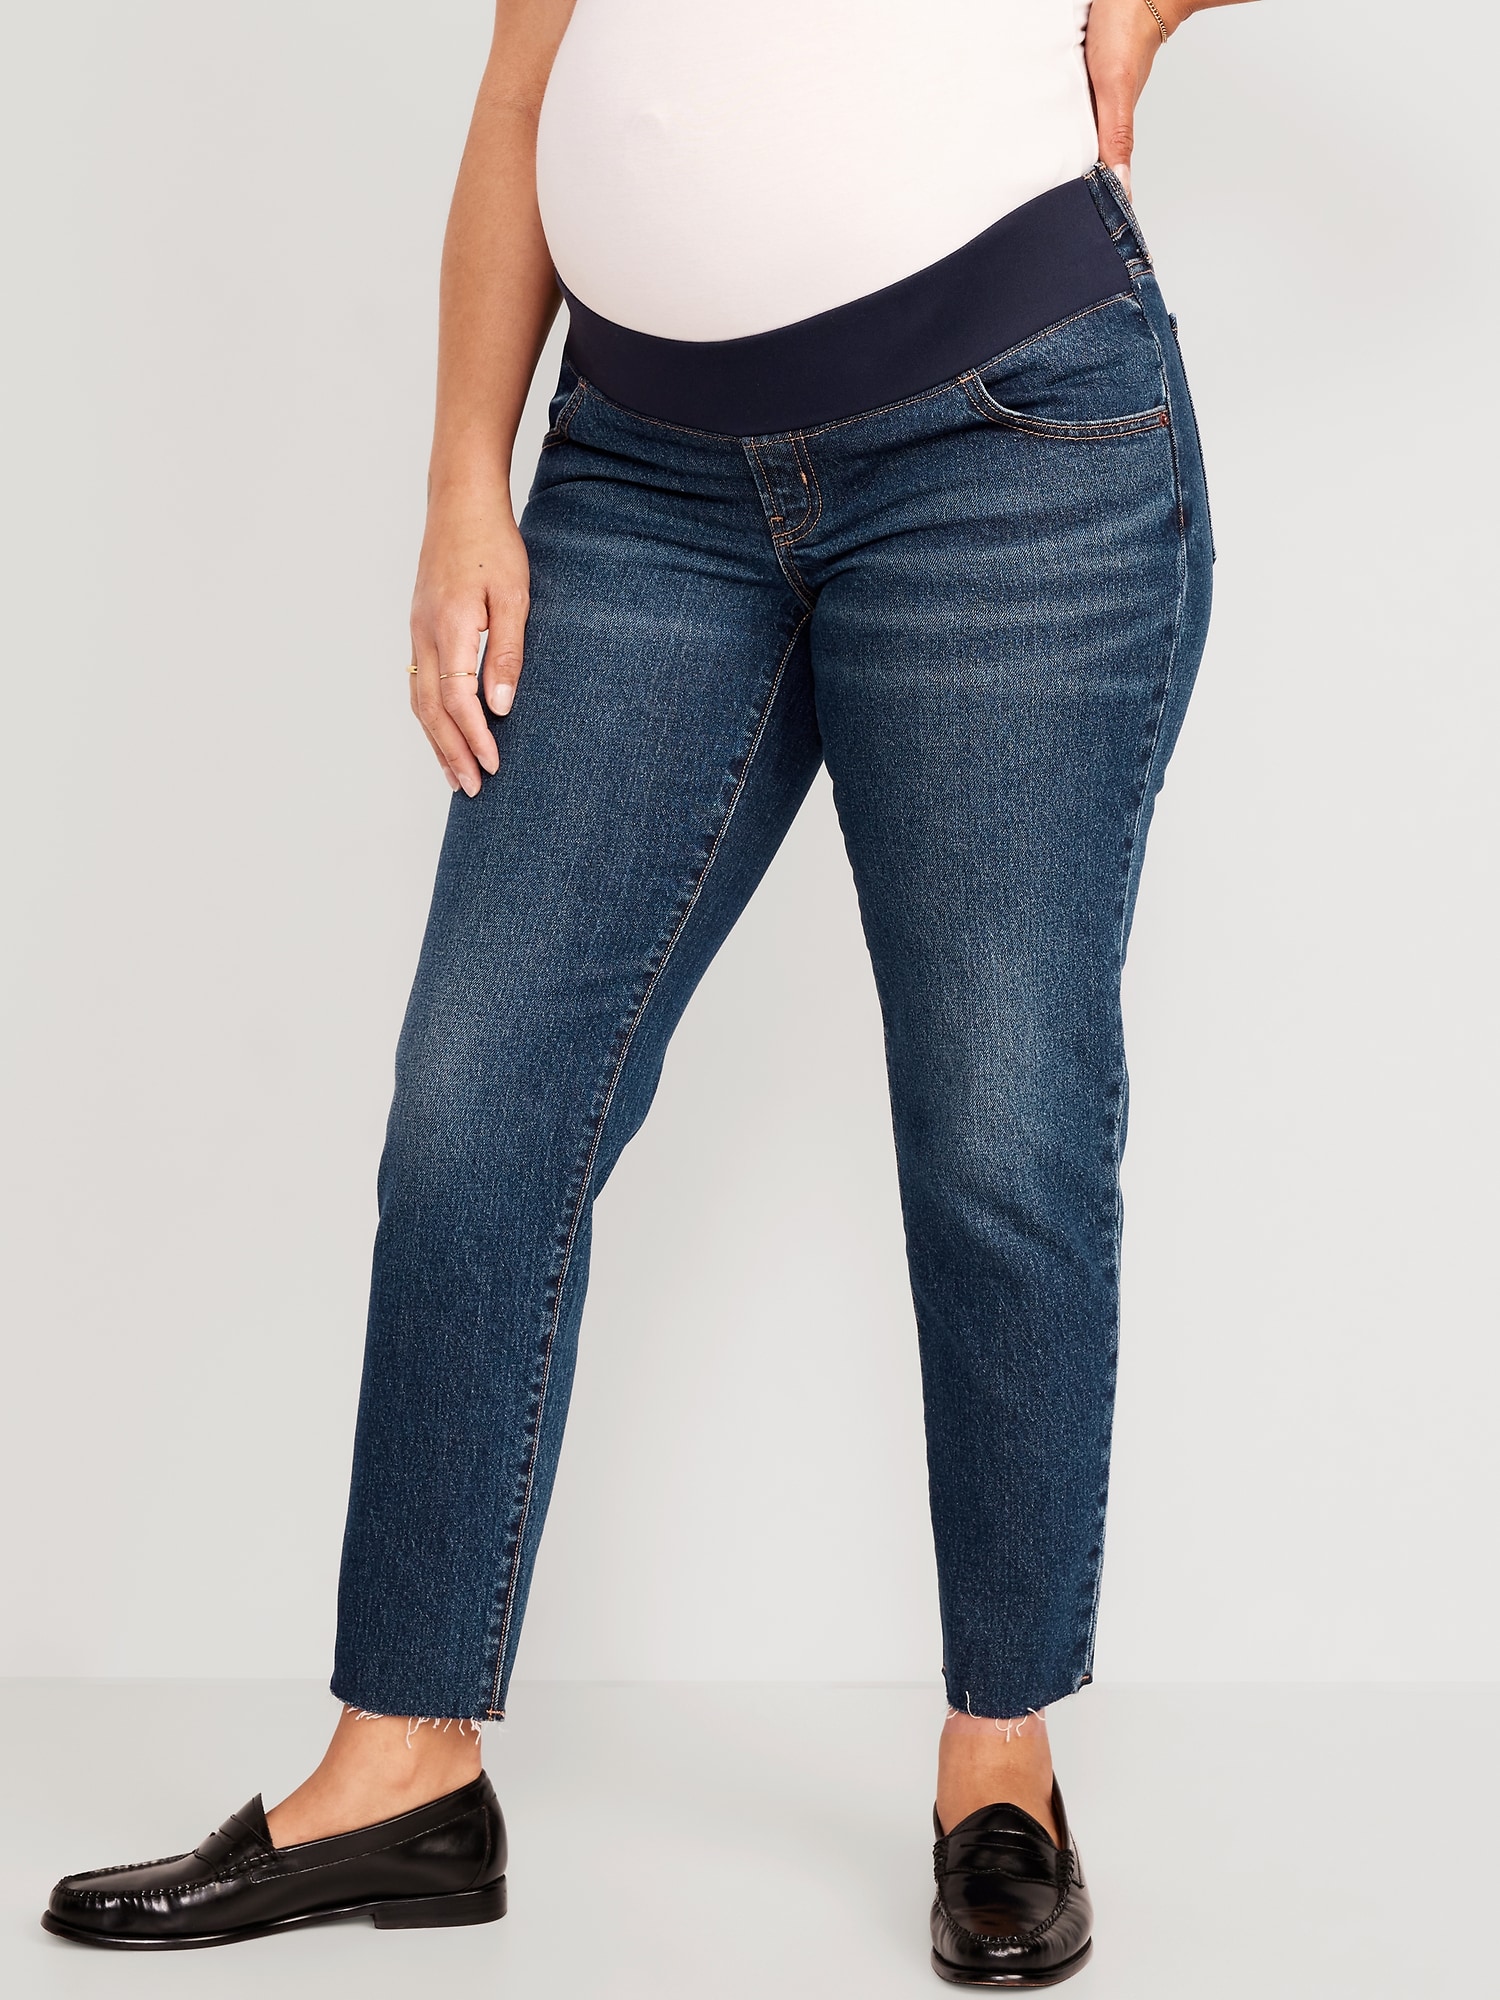 MAMAJEANS Capri - Cropped Maternity Jeans, Fringed, 3/4 Summer Premium  Jeans - Made in Italy